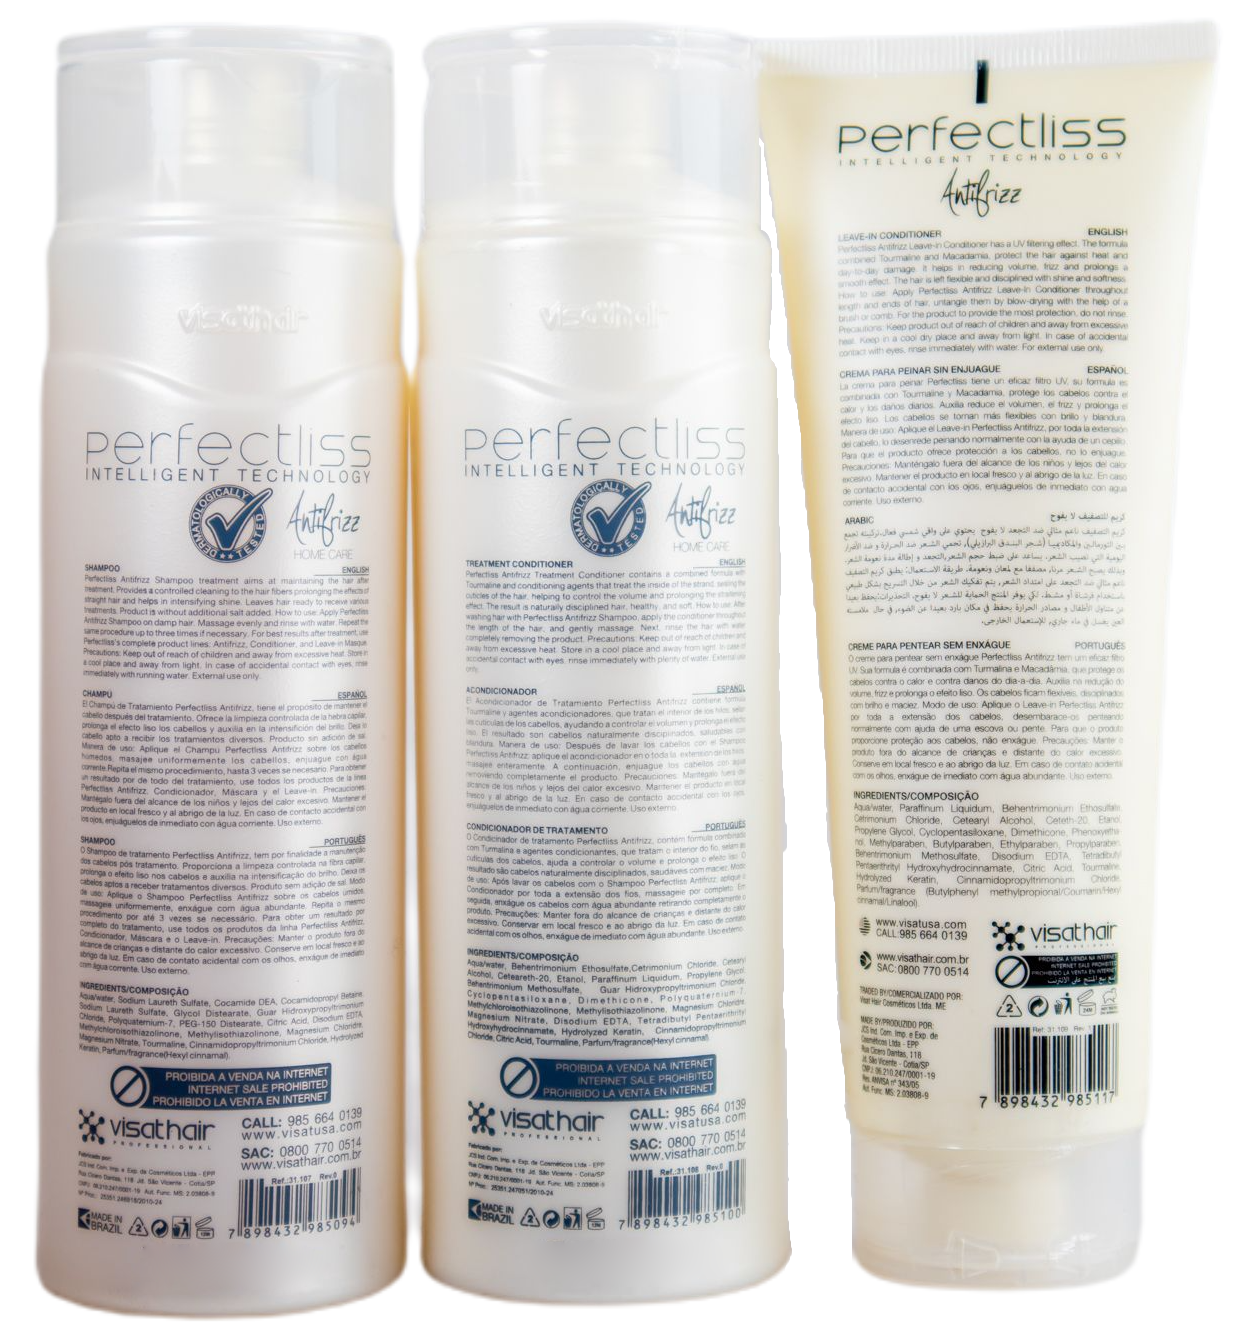 Perfect Liss Home Care Home Care Tourmaline Anti Frizz Kit 3 Products - Perfect Liss